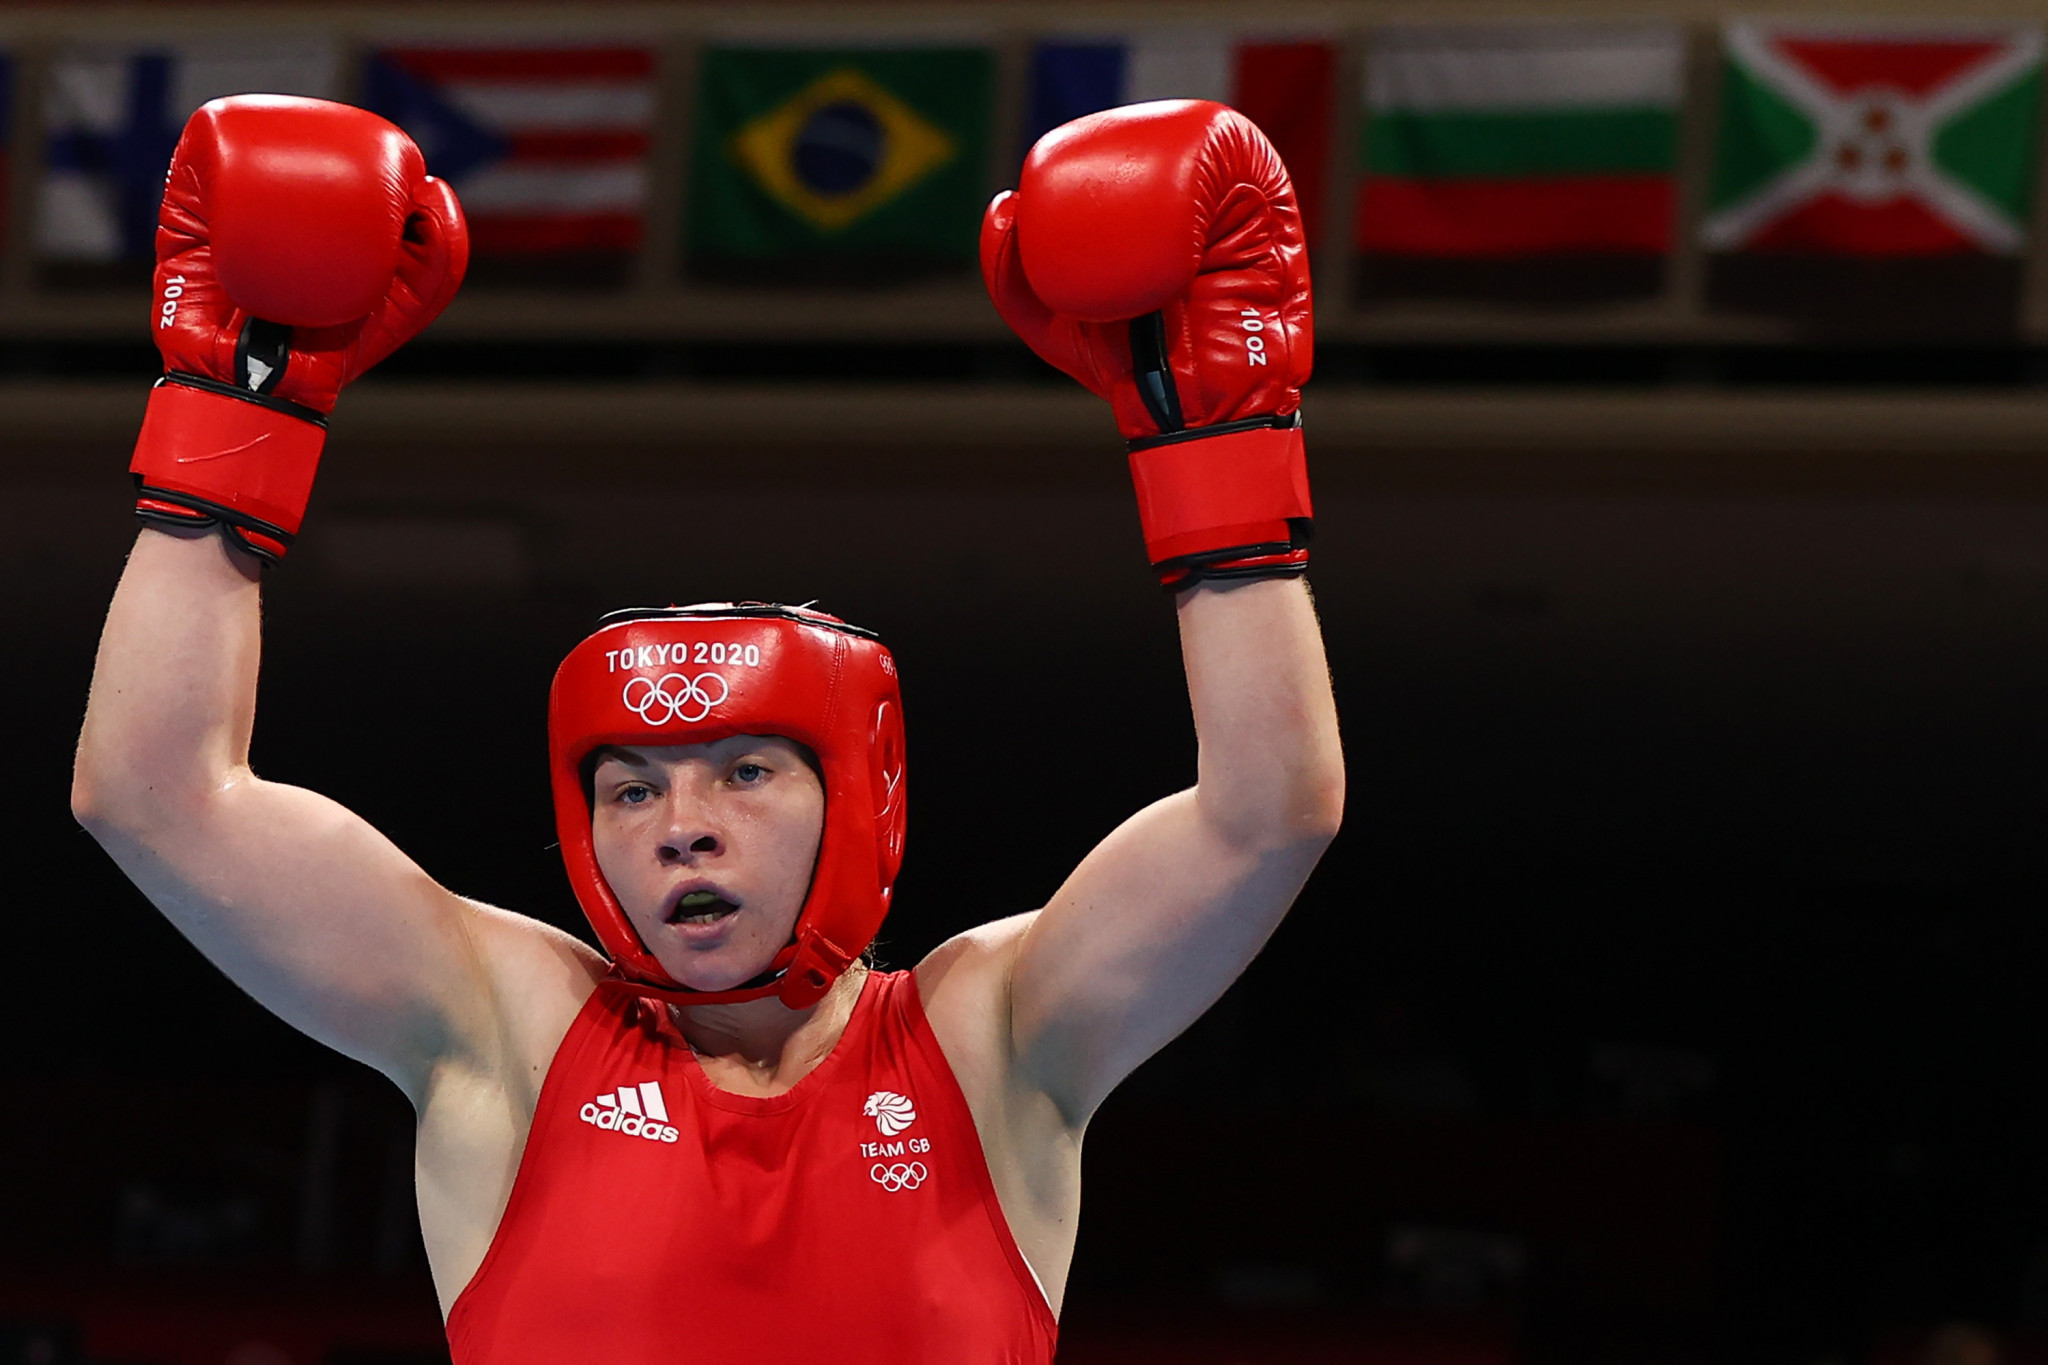 Price to turn professional in 2022, casting doubt over Commonwealth Games title defence